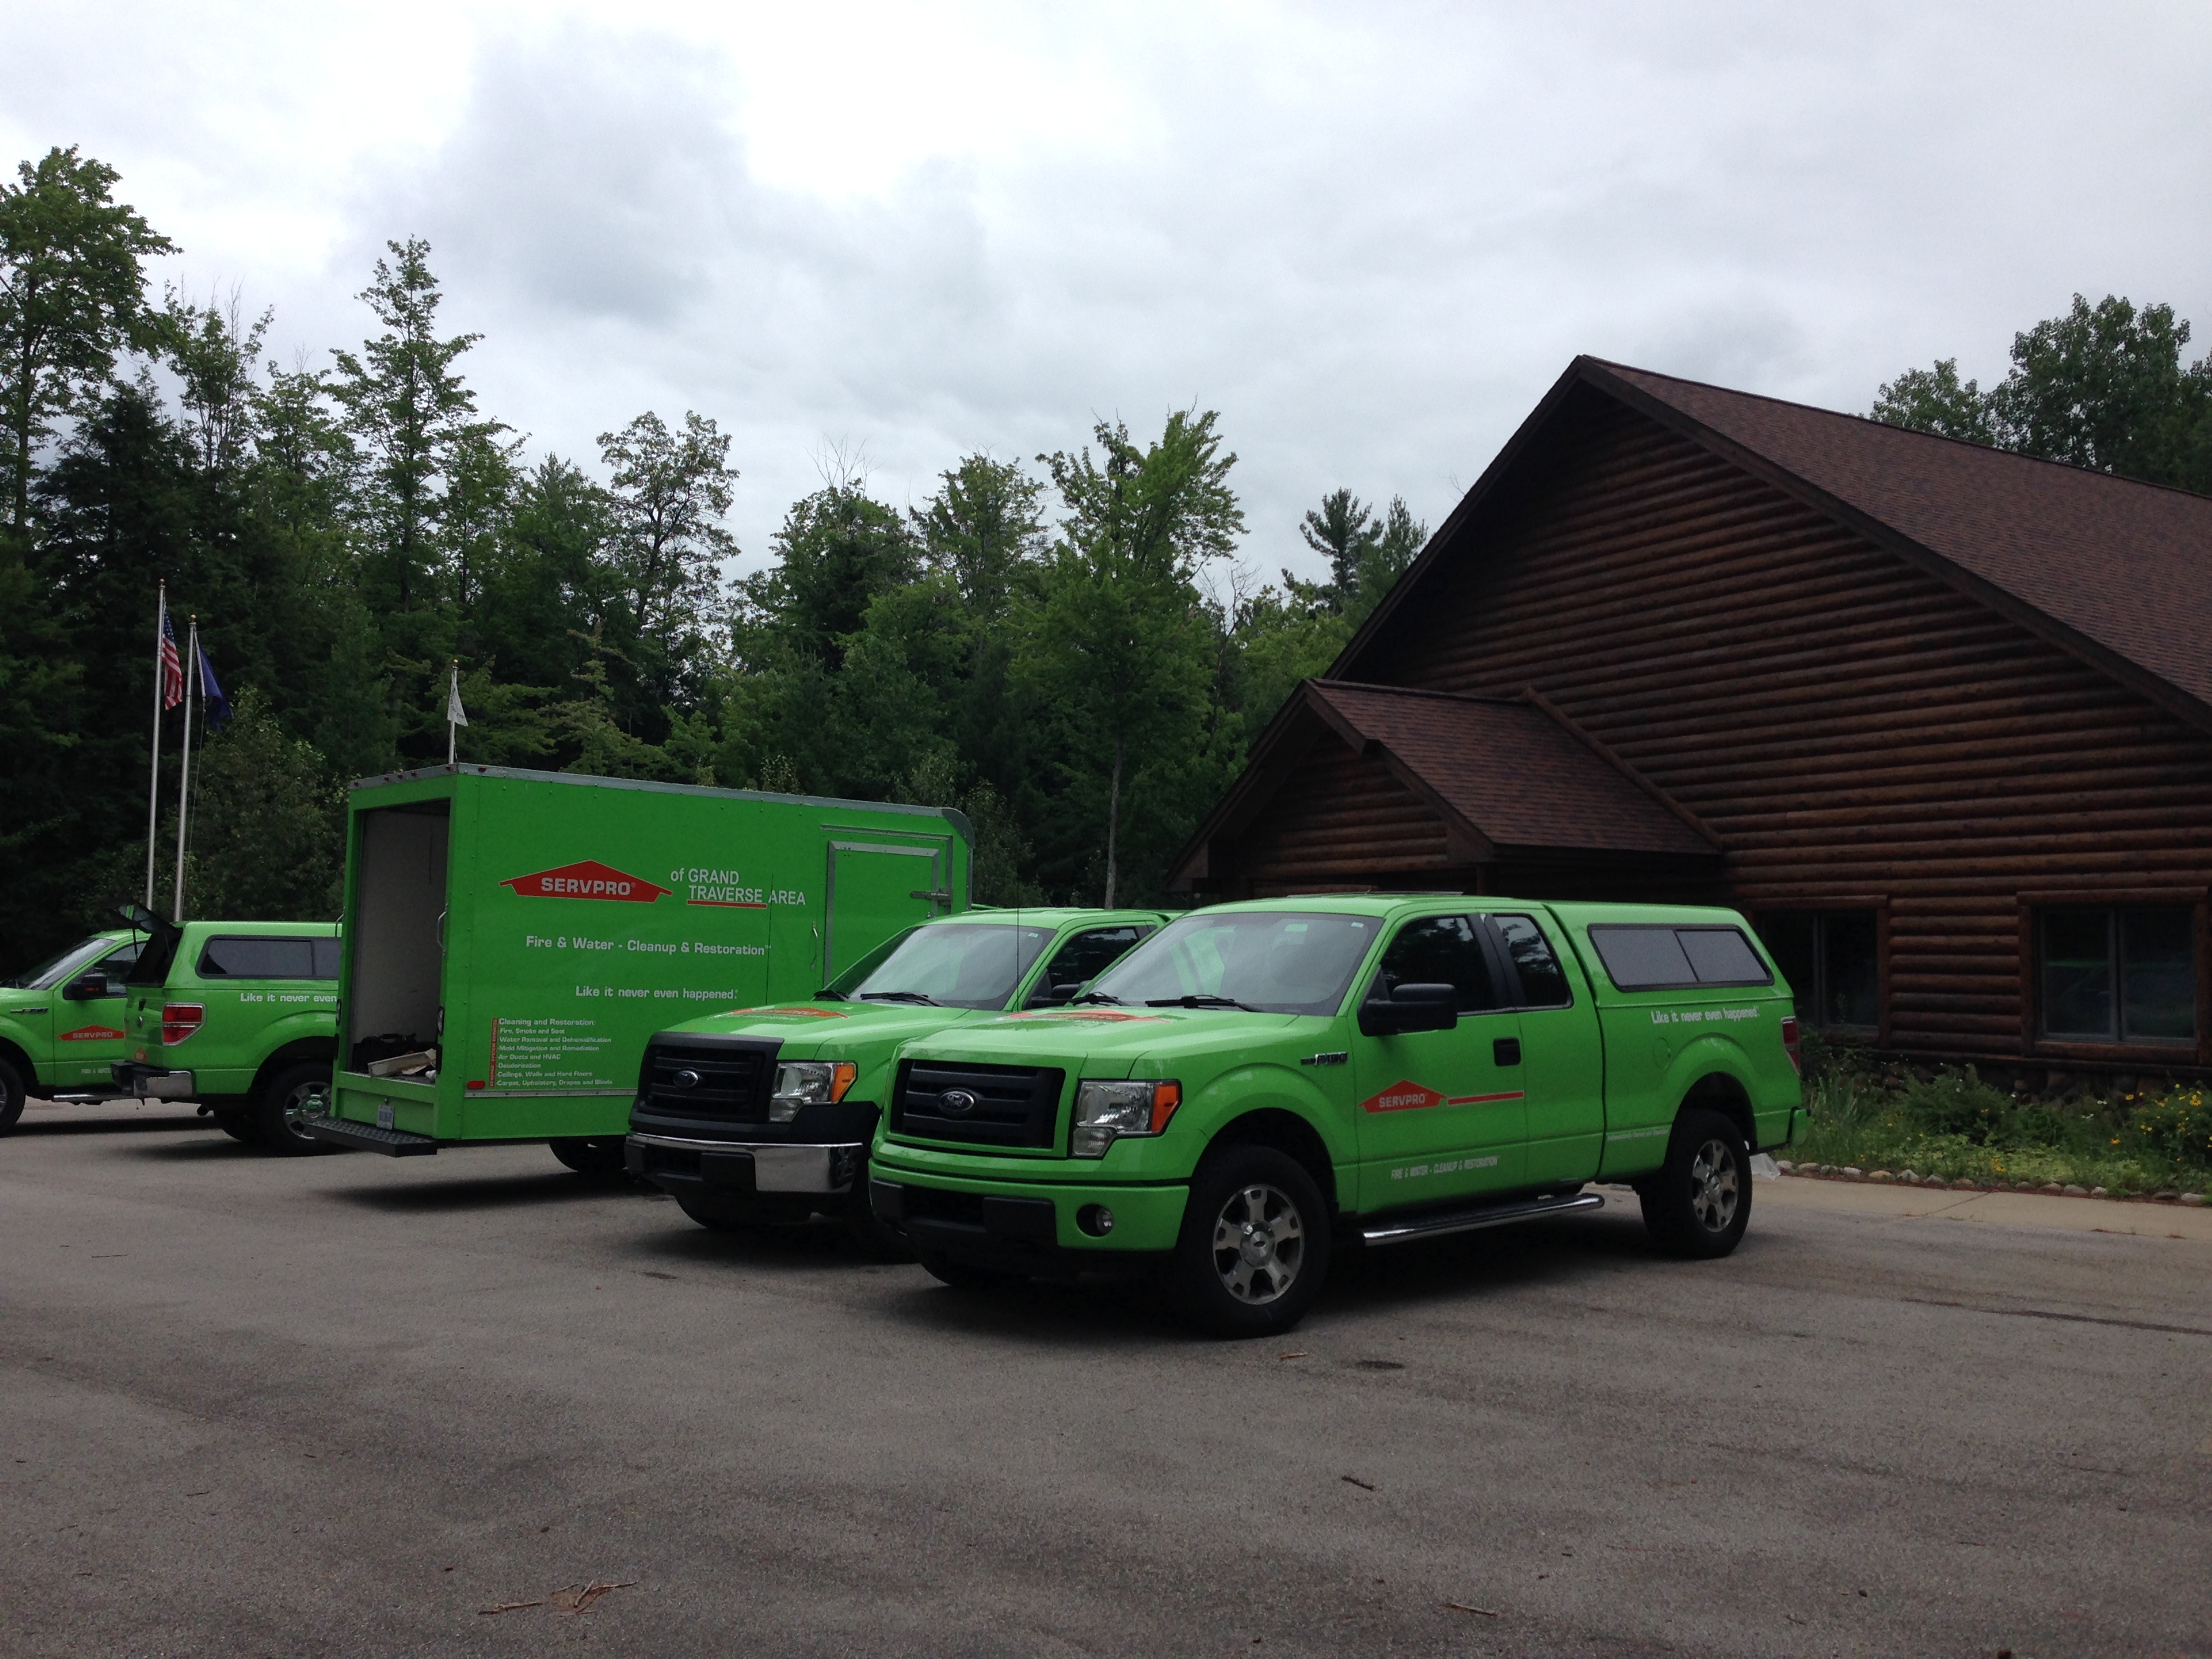 SERVPRO of Grand Traverse Area onsite for large commercial loss.